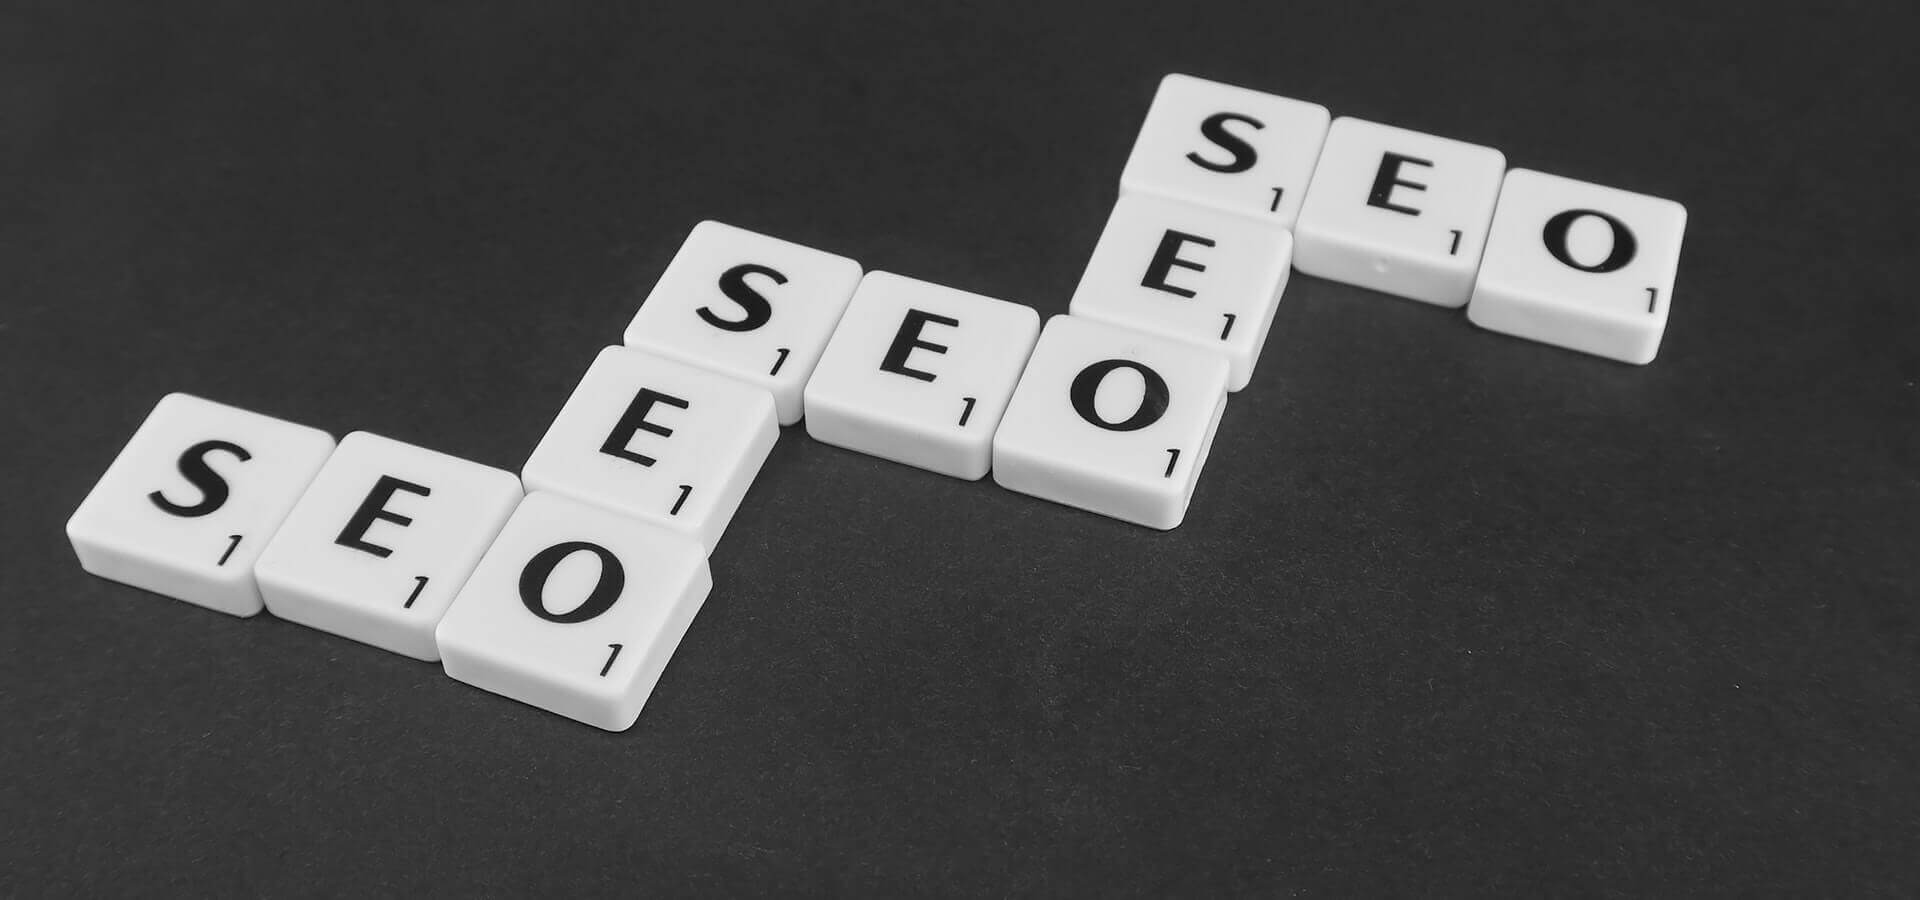 Bad SEO Practices Your Business Should Avoid